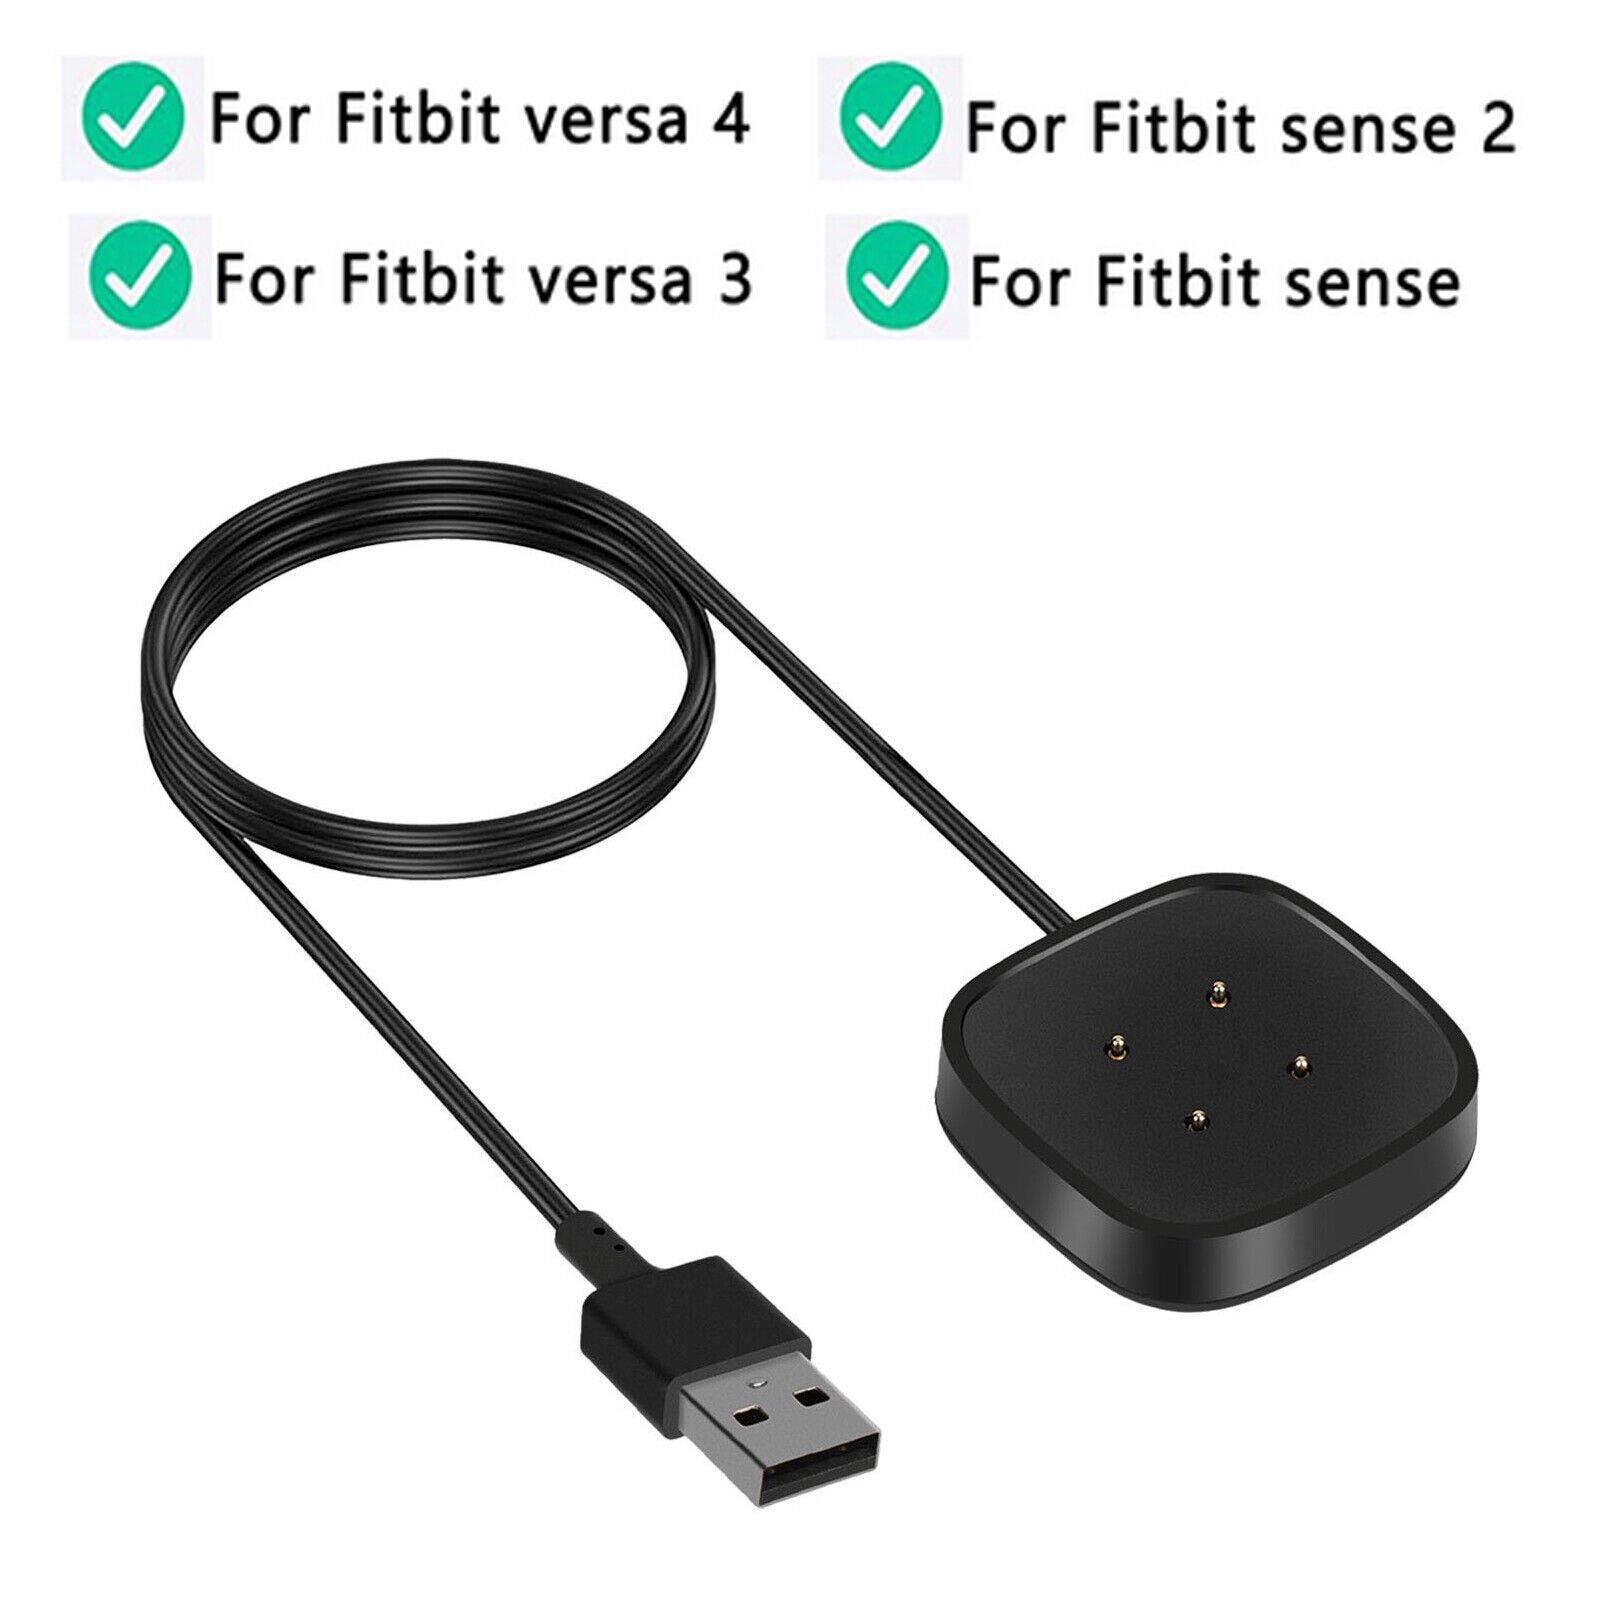 Lot of USB Charging Dock Fast Cable Charger For Fitbit Versa 4 3 Sense 2 Watch